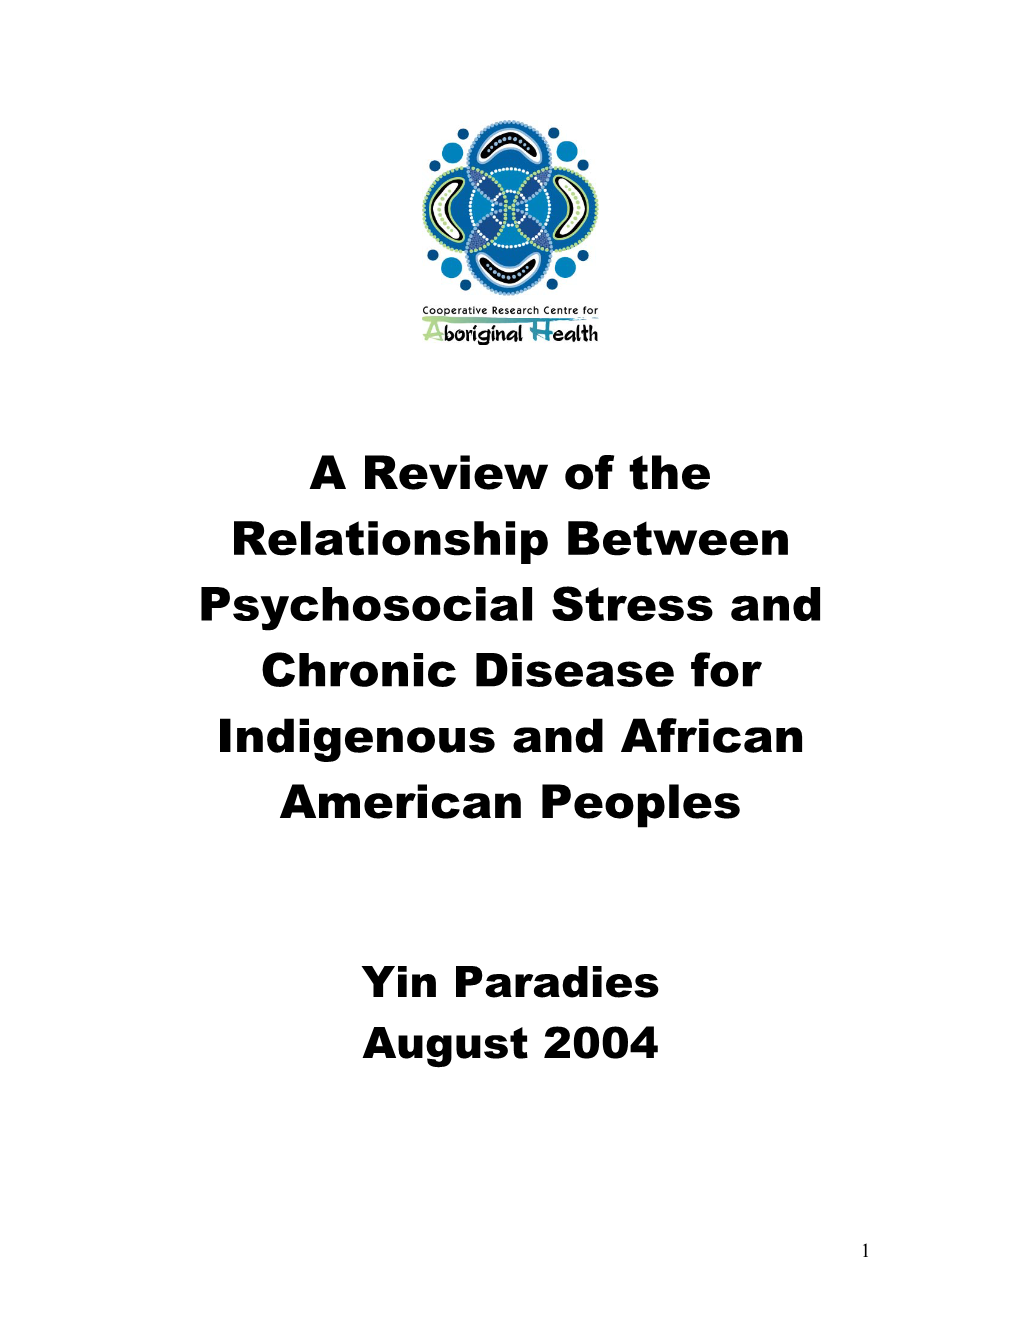 A Review of the Relationship Between Psychosocial Stress and Chronic Disease for Indigenous and African American Peoples